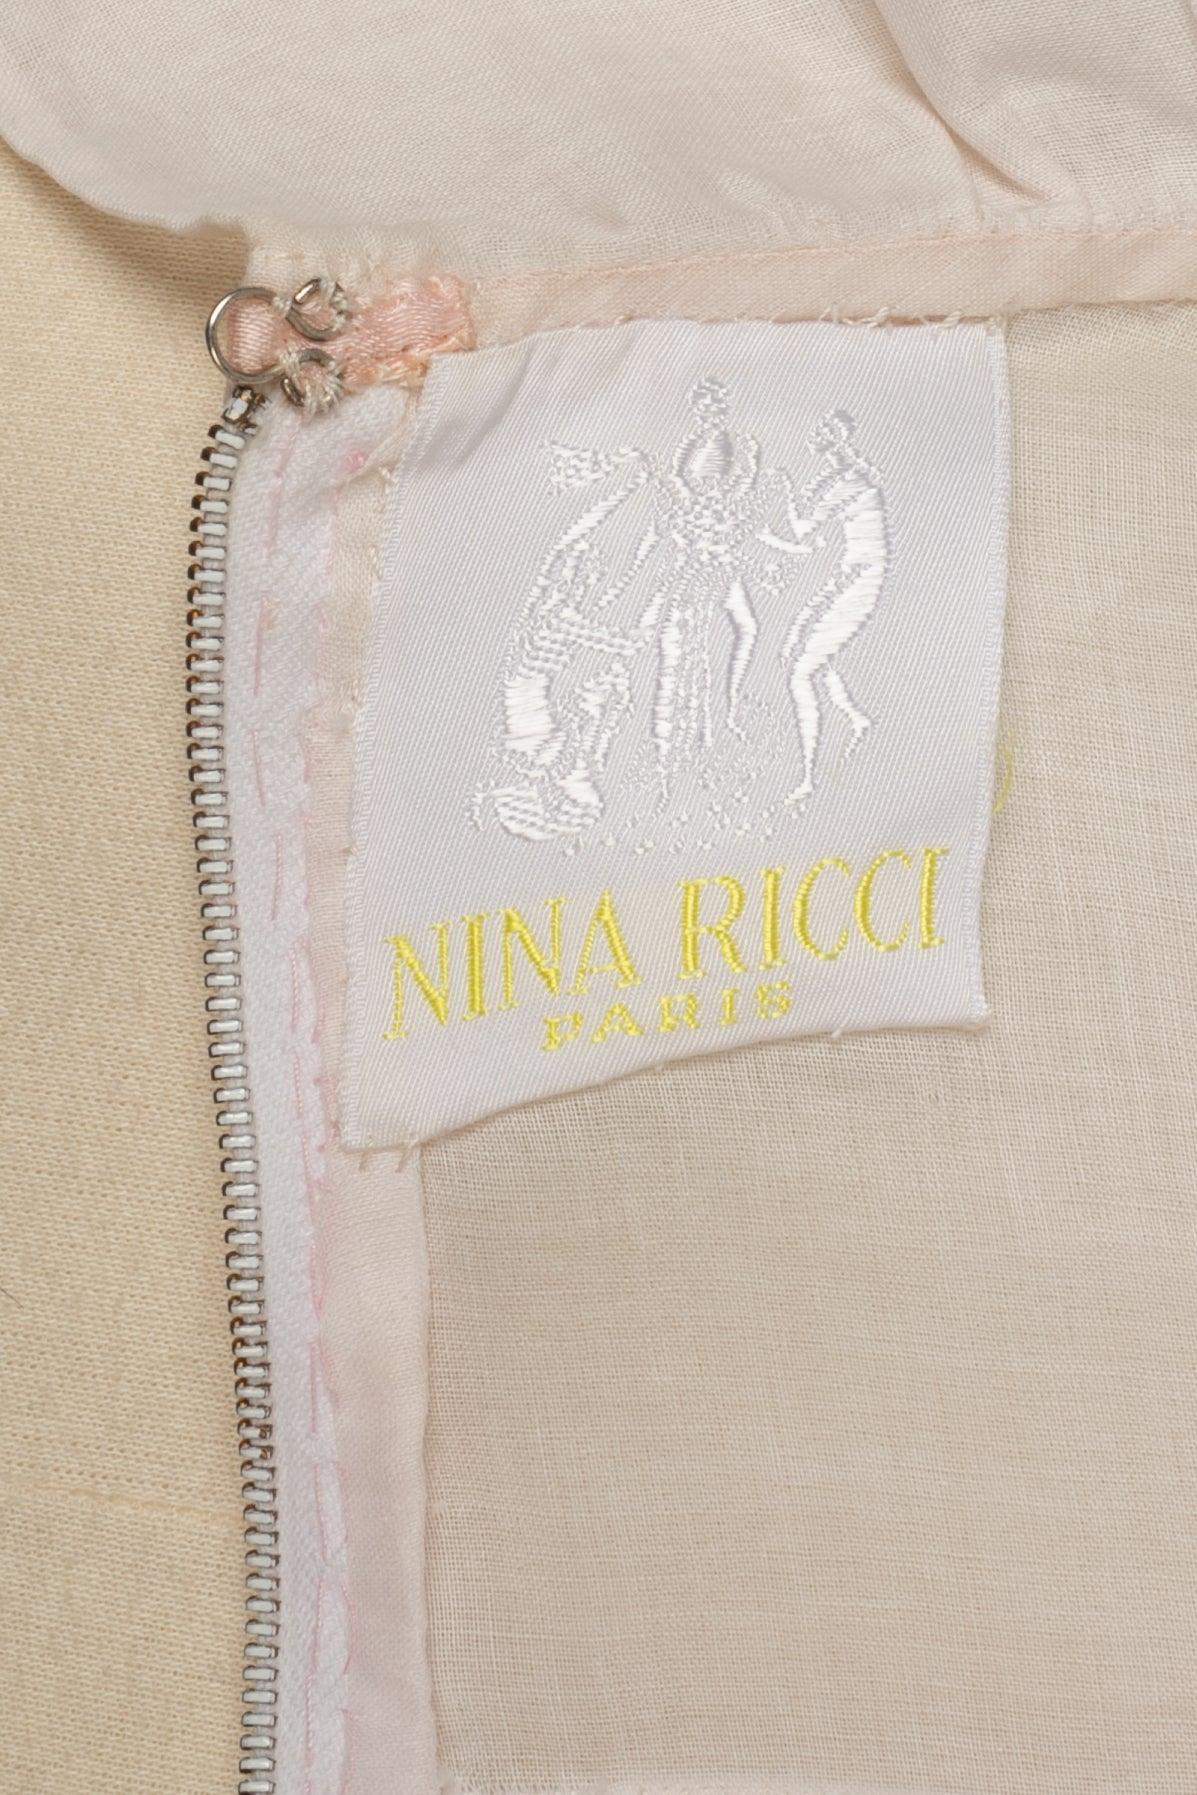 Nina Ricci Flounced Top in White and Pale Pink Tones For Sale 3